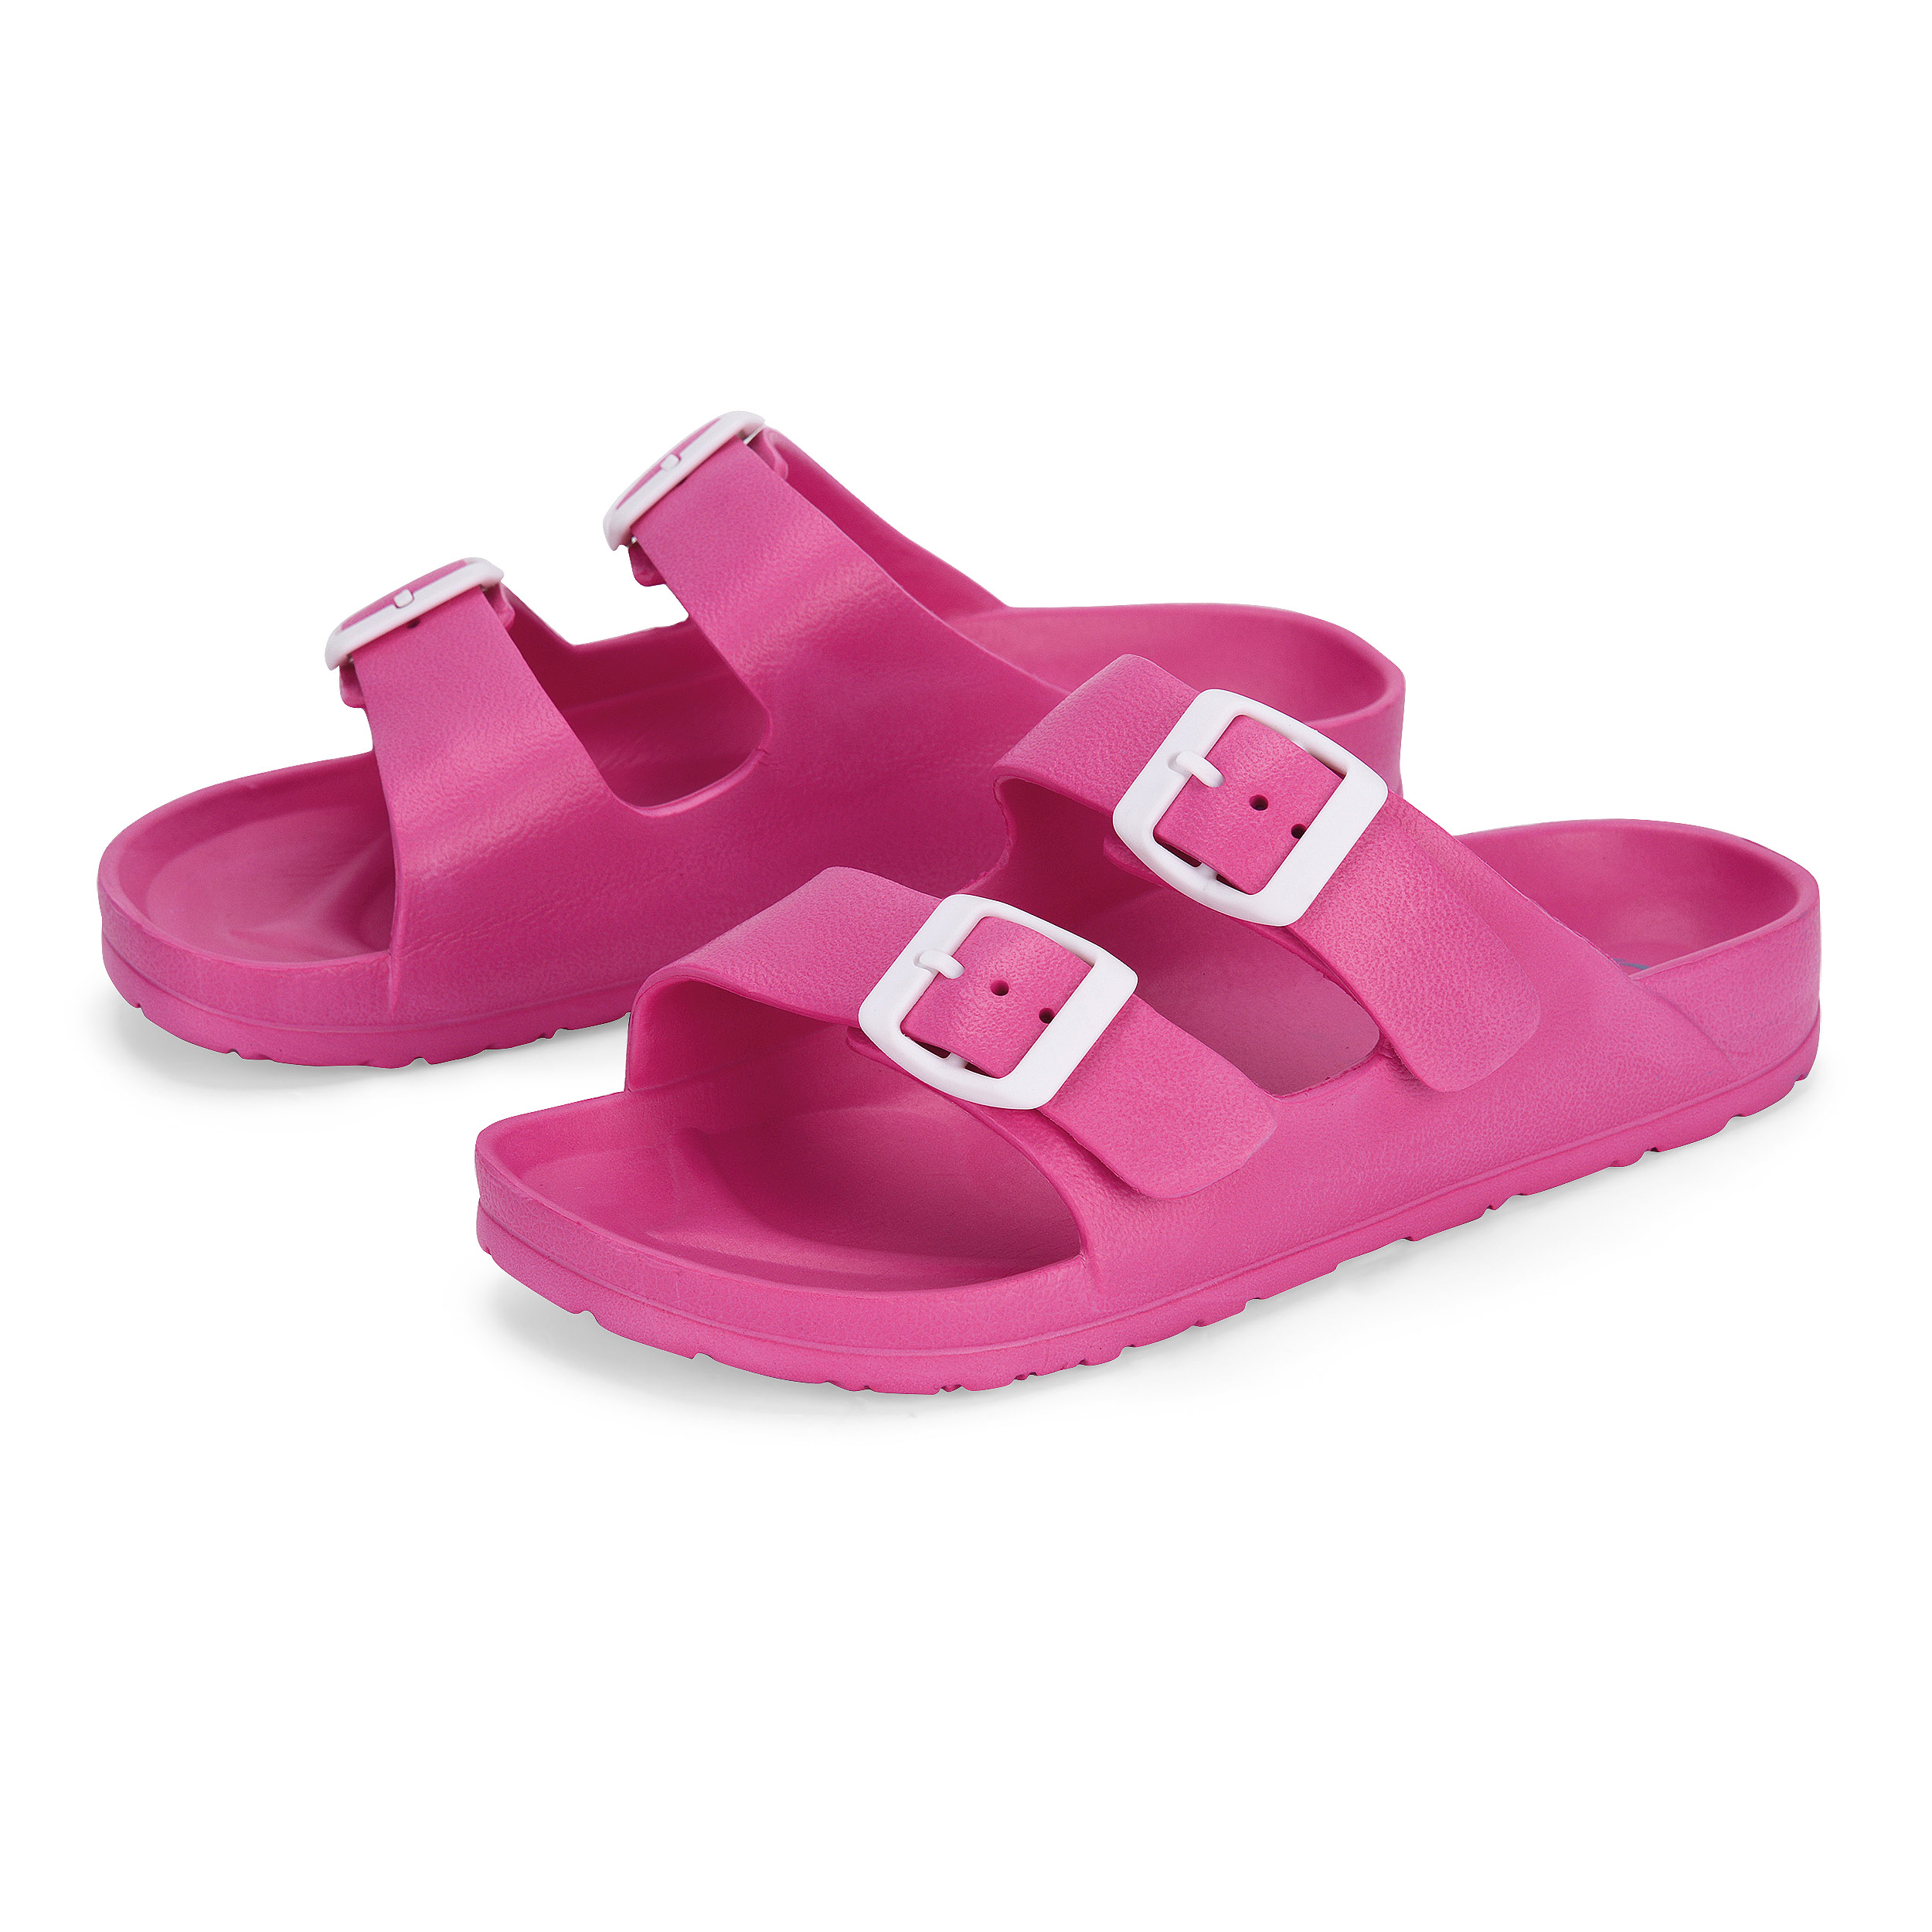 Twin Buckle Sandals - Kids - Pink and Teal- Yello - The Irish Experience